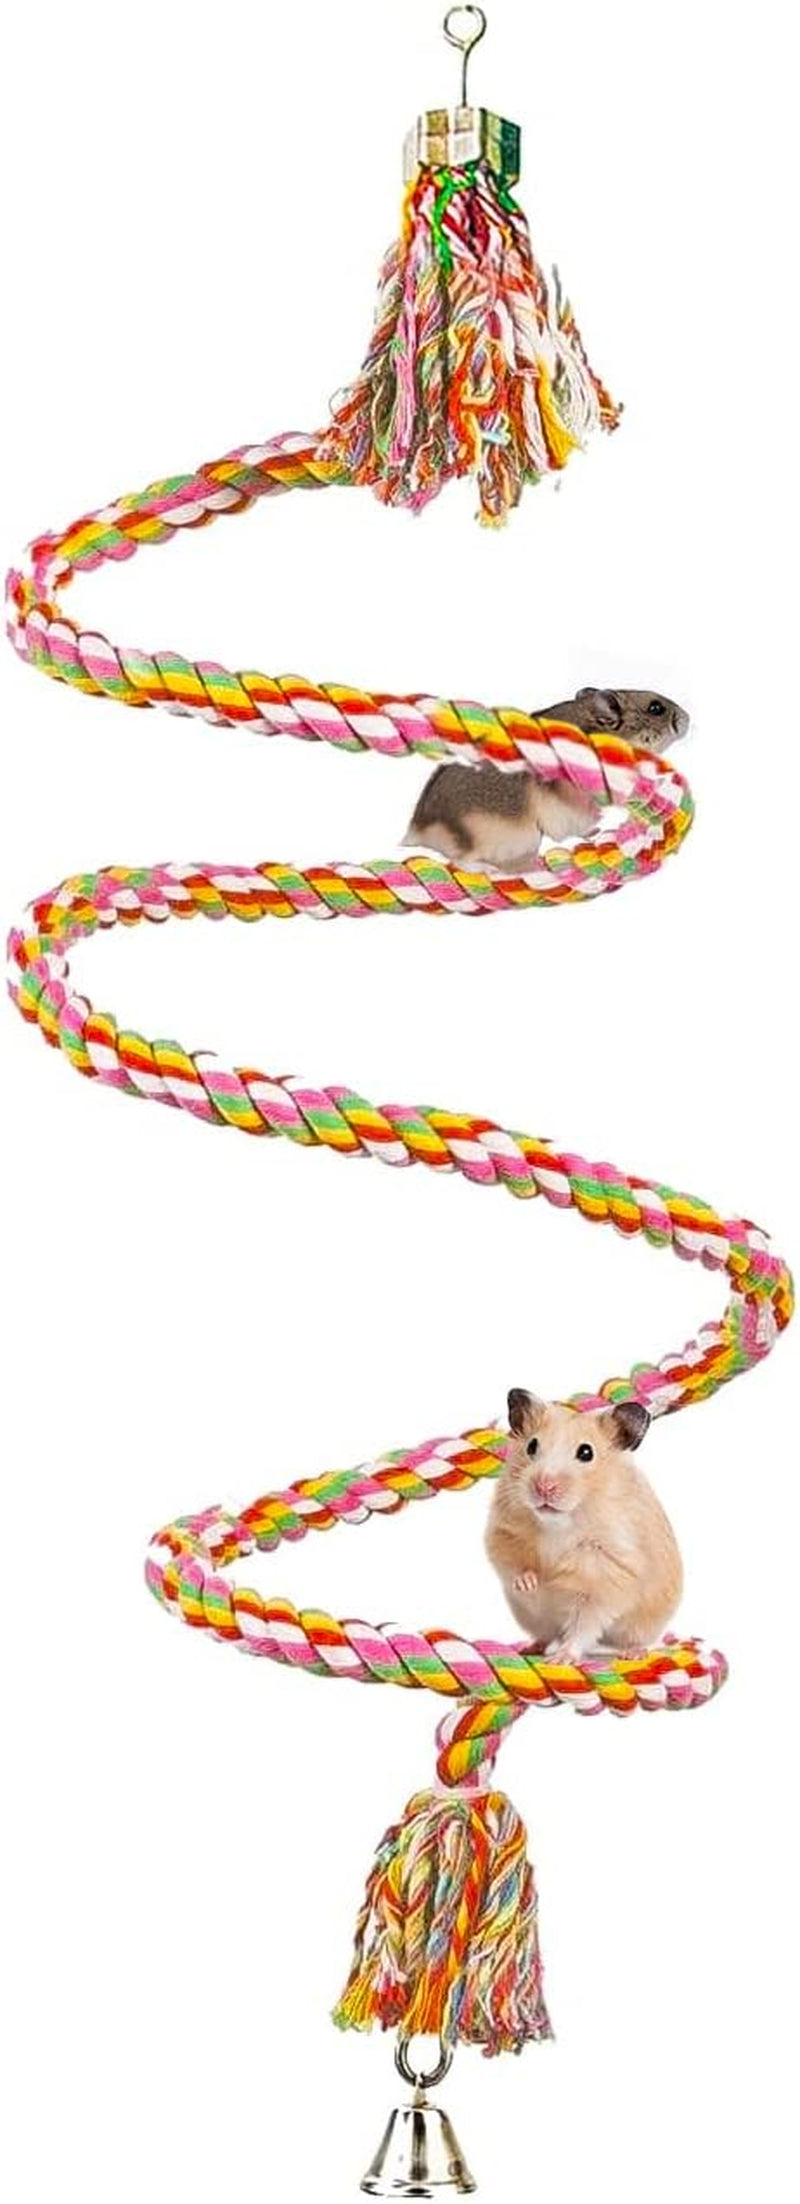 Sungrow Rope Perch for Hamsters, Sugar Gliders, Reptiles, 59” Long, Spiral Design with Jingling Bell, Vibrant Handmade Chew Toy Animals & Pet Supplies > Pet Supplies > Bird Supplies > Bird Toys SunGrow   